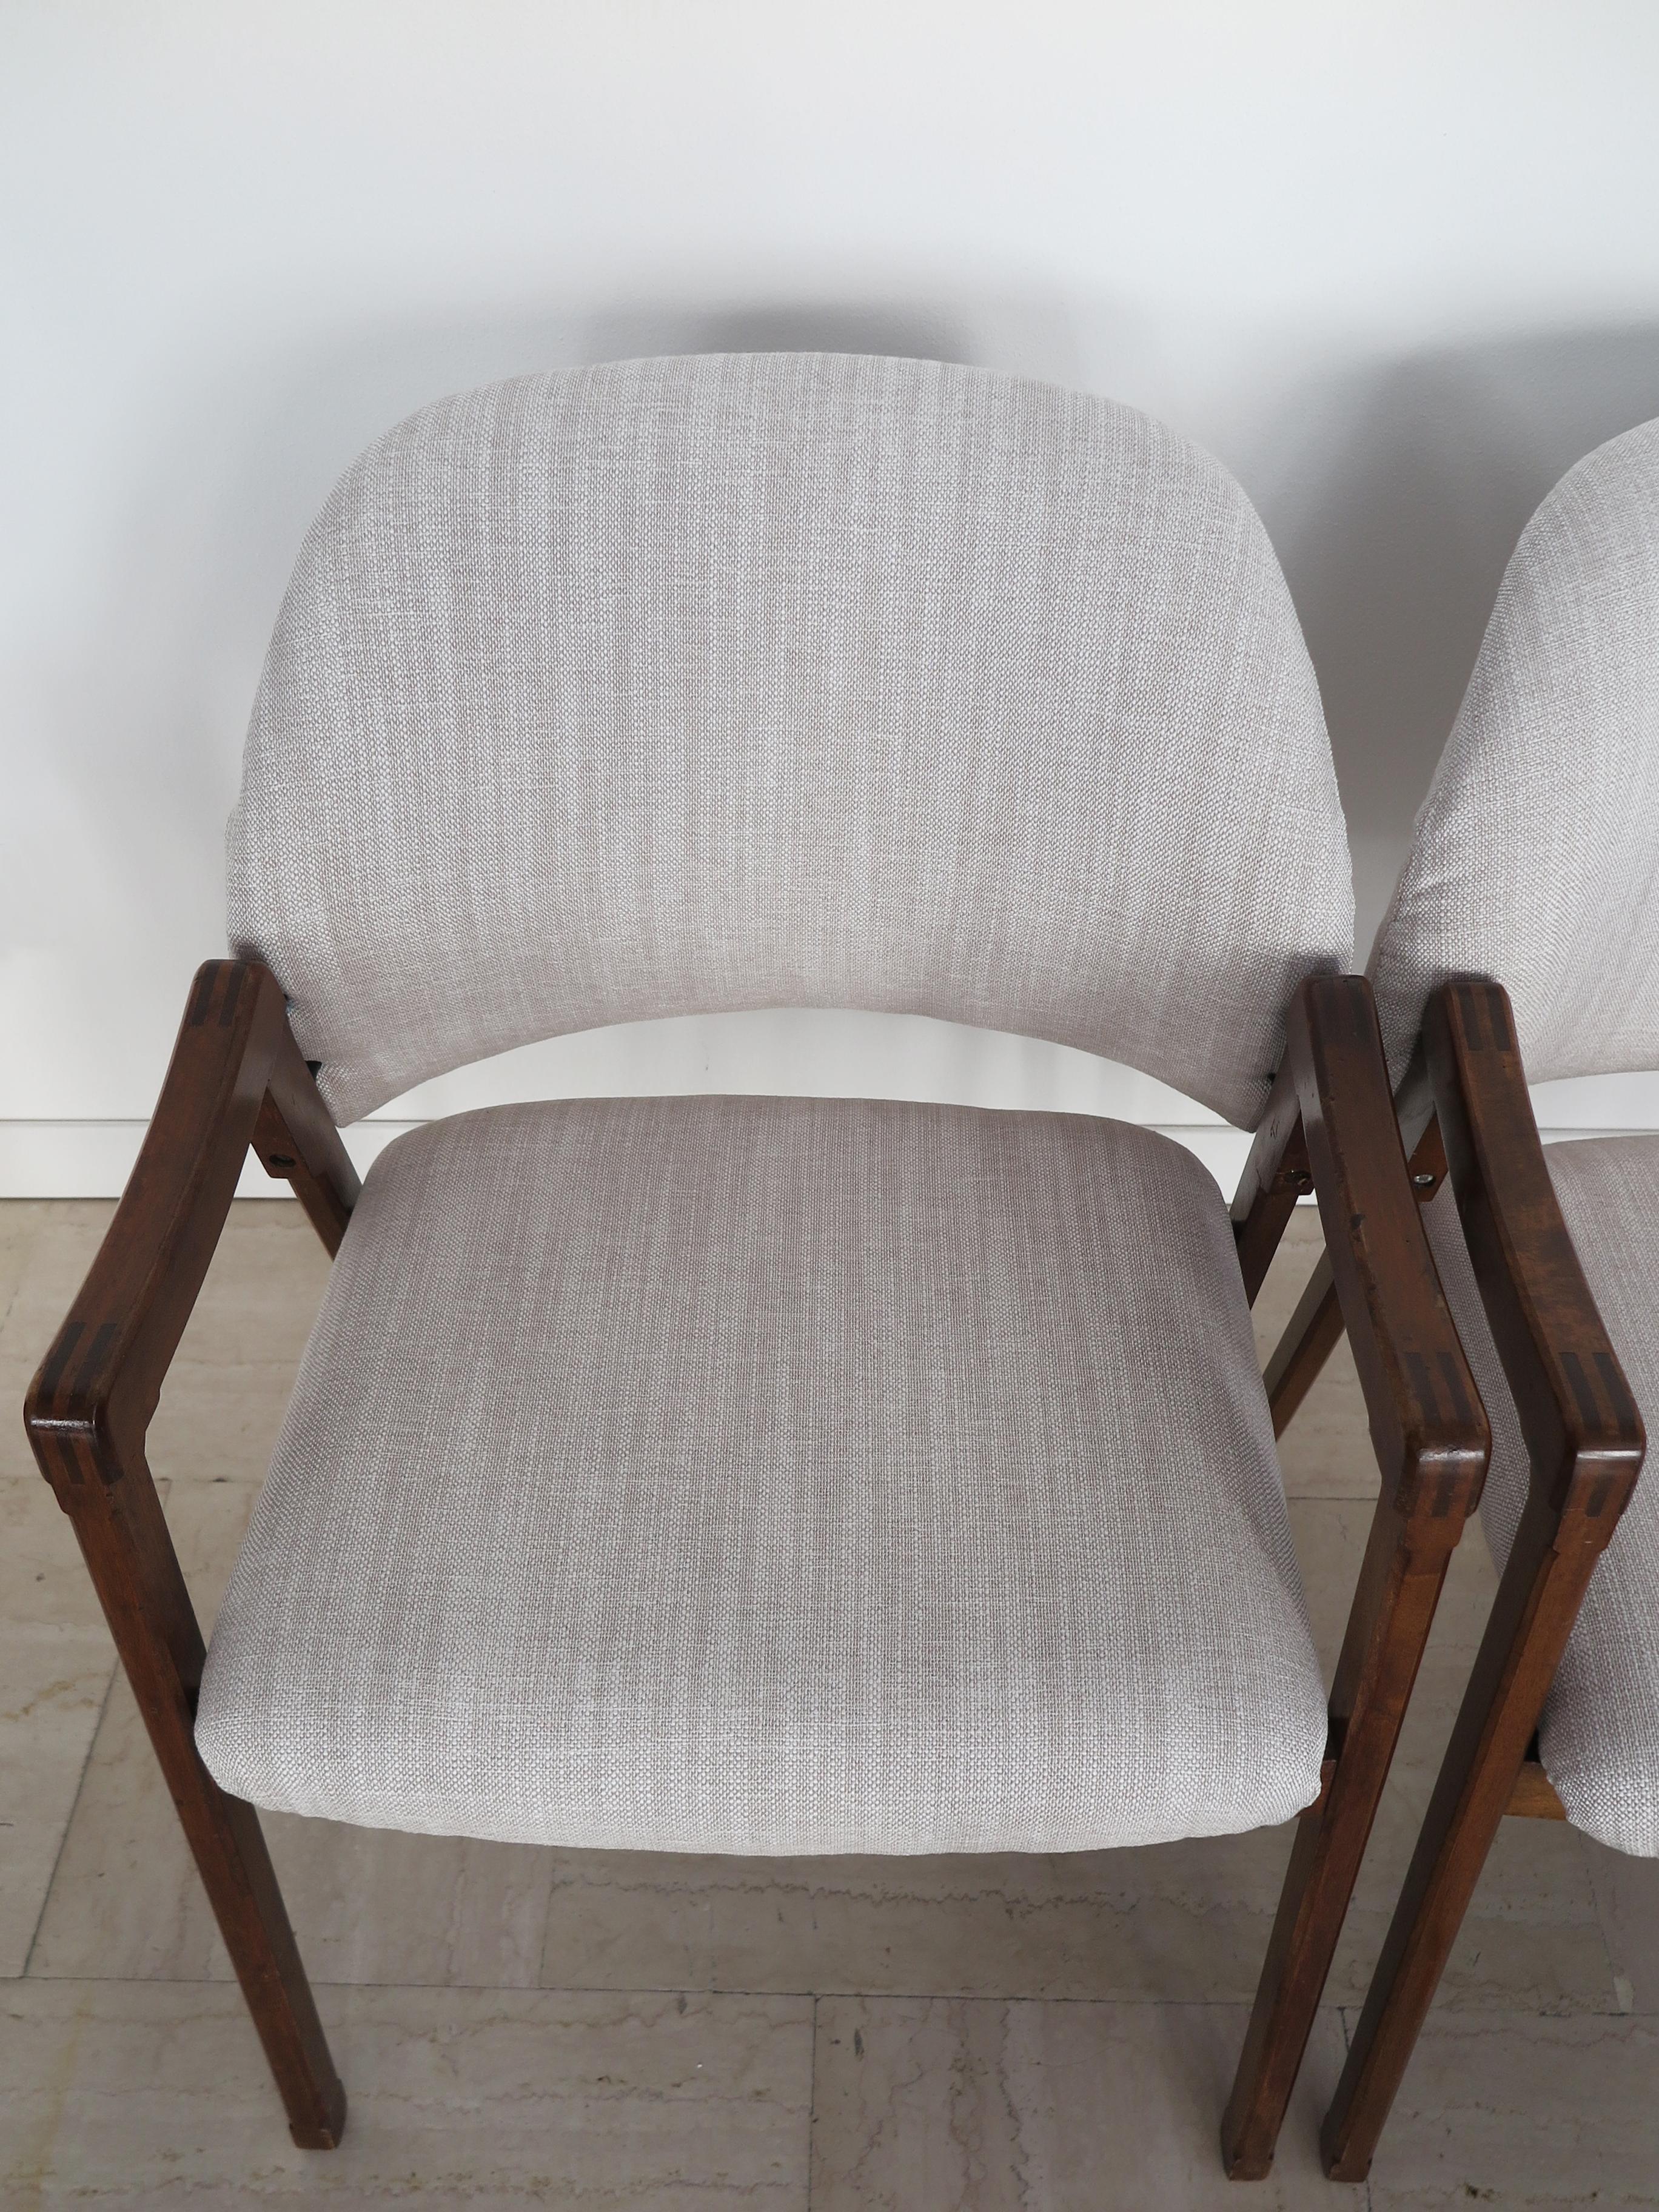 Ico Parisi Italian Midcentury Fabric Wood Armchair Model 814 for Cassina, 1960s For Sale 5